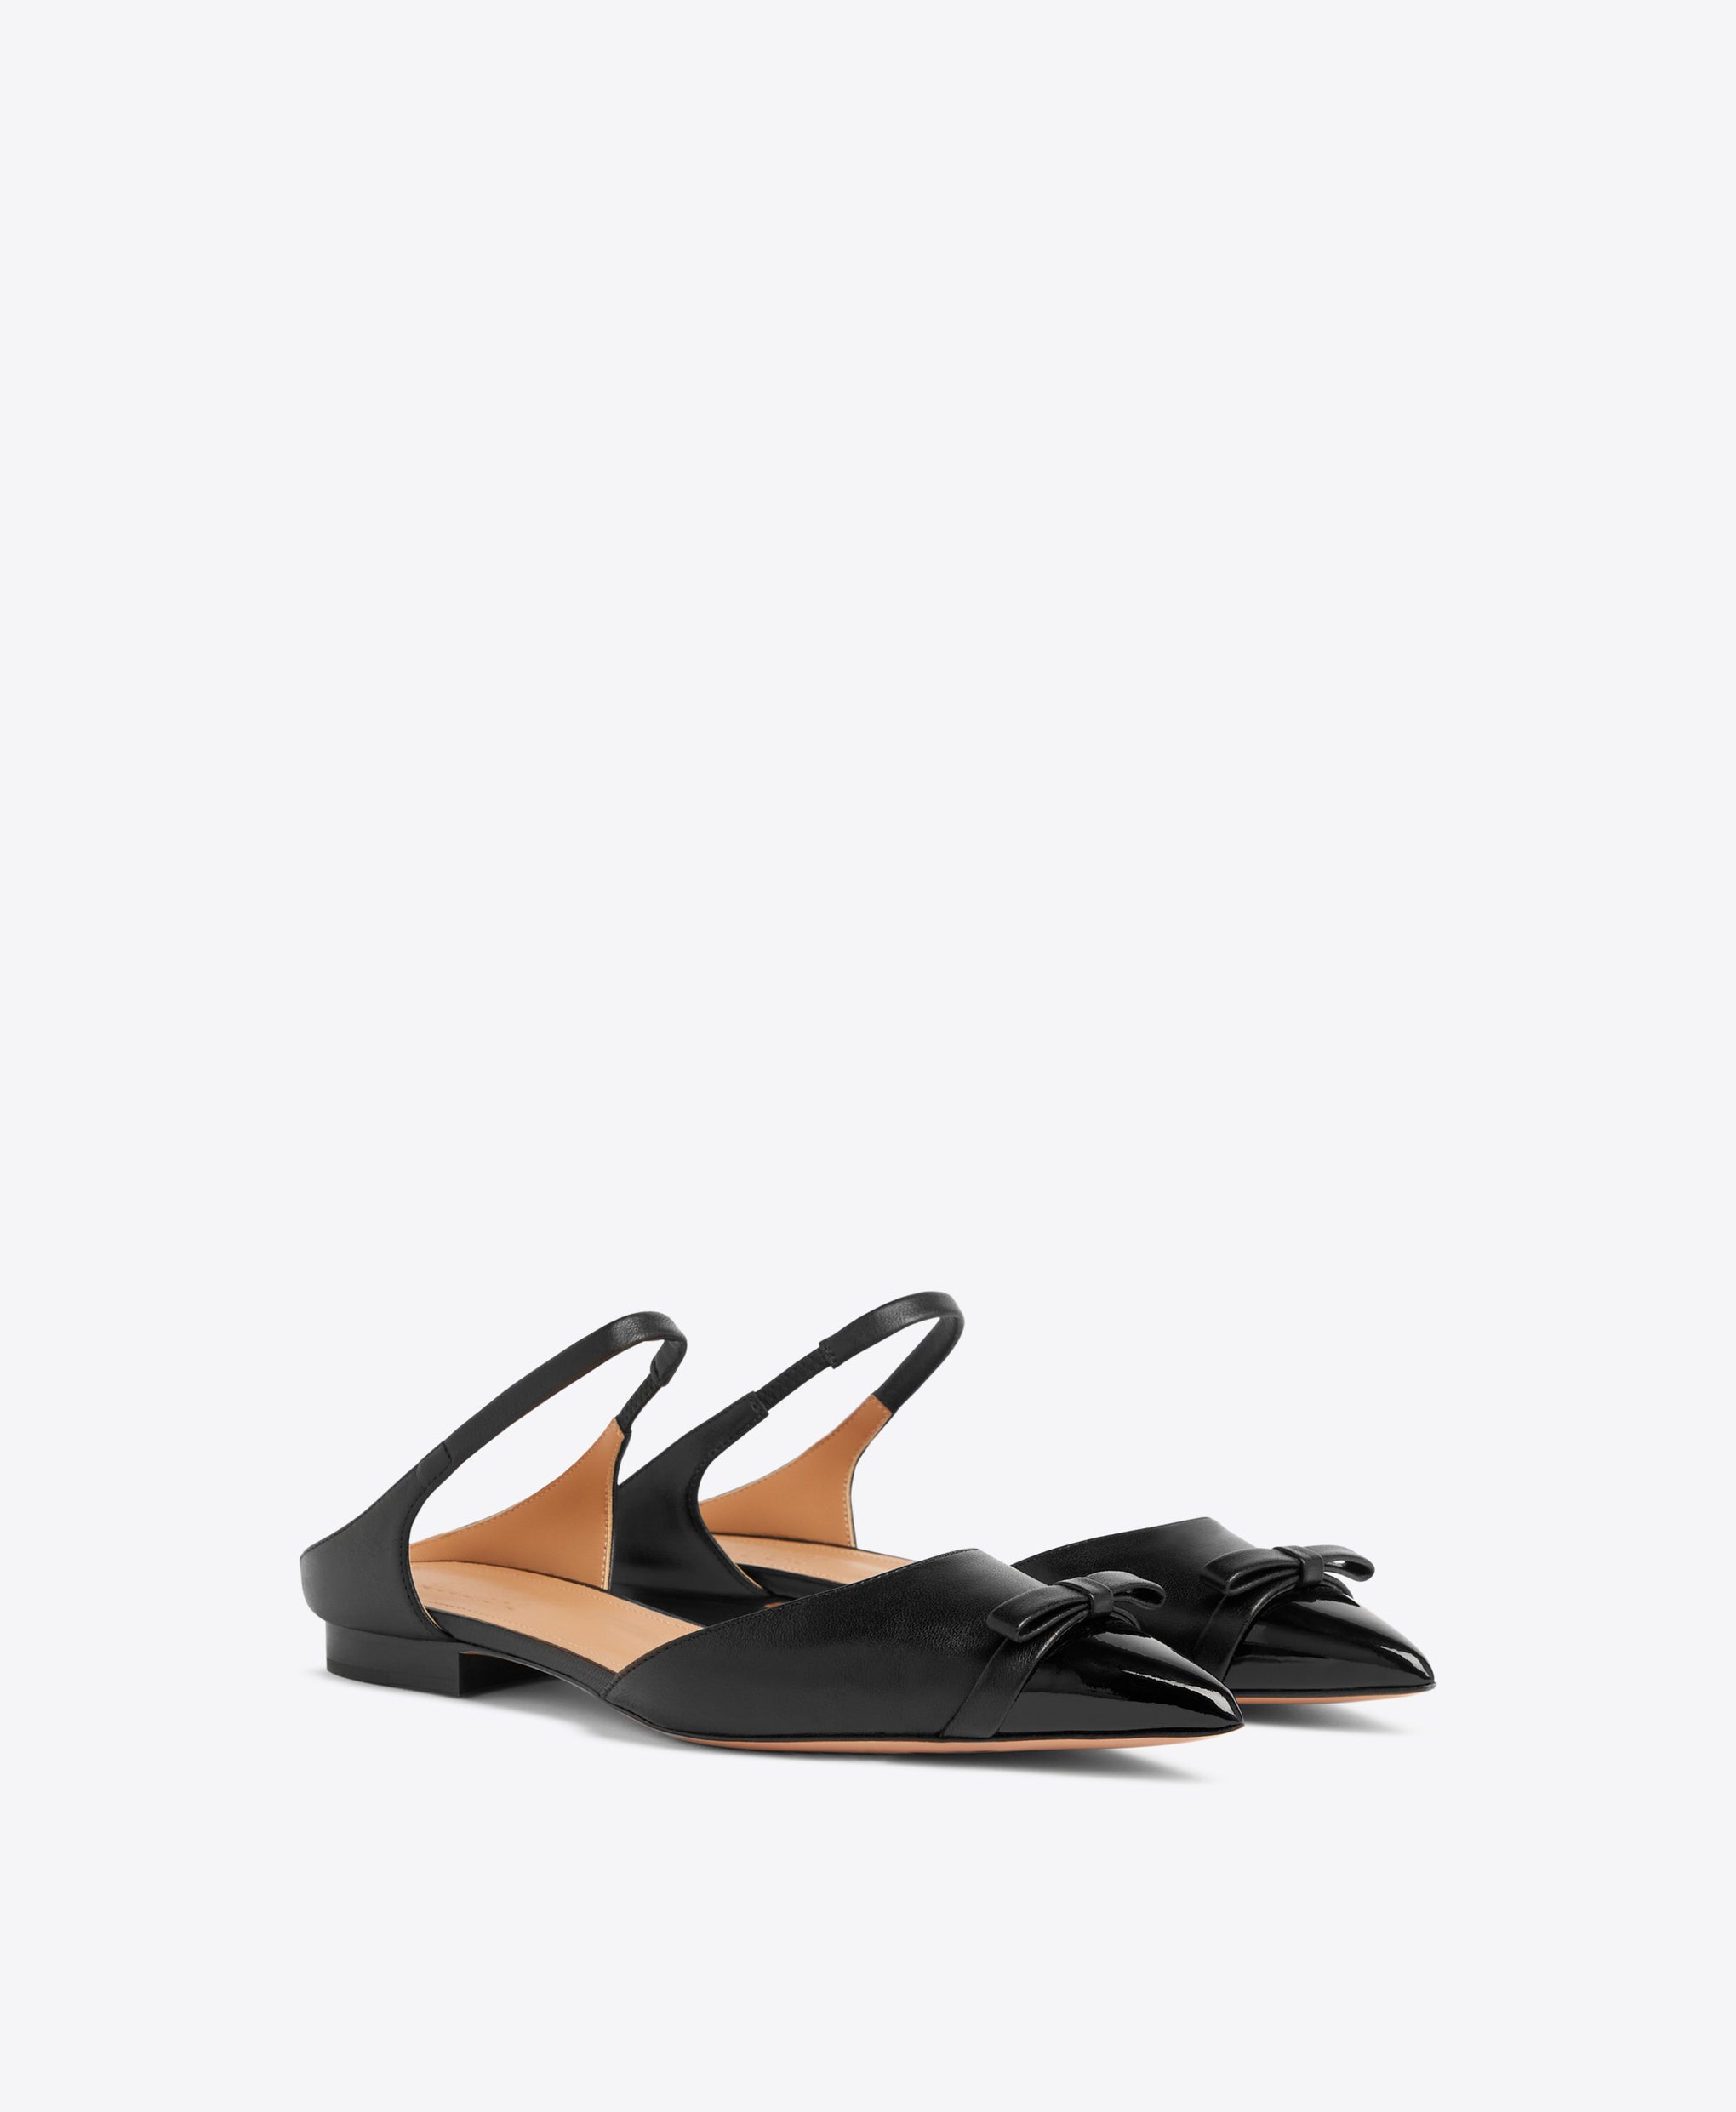 Malone Souliers Blythe Flat Black Leather Mules